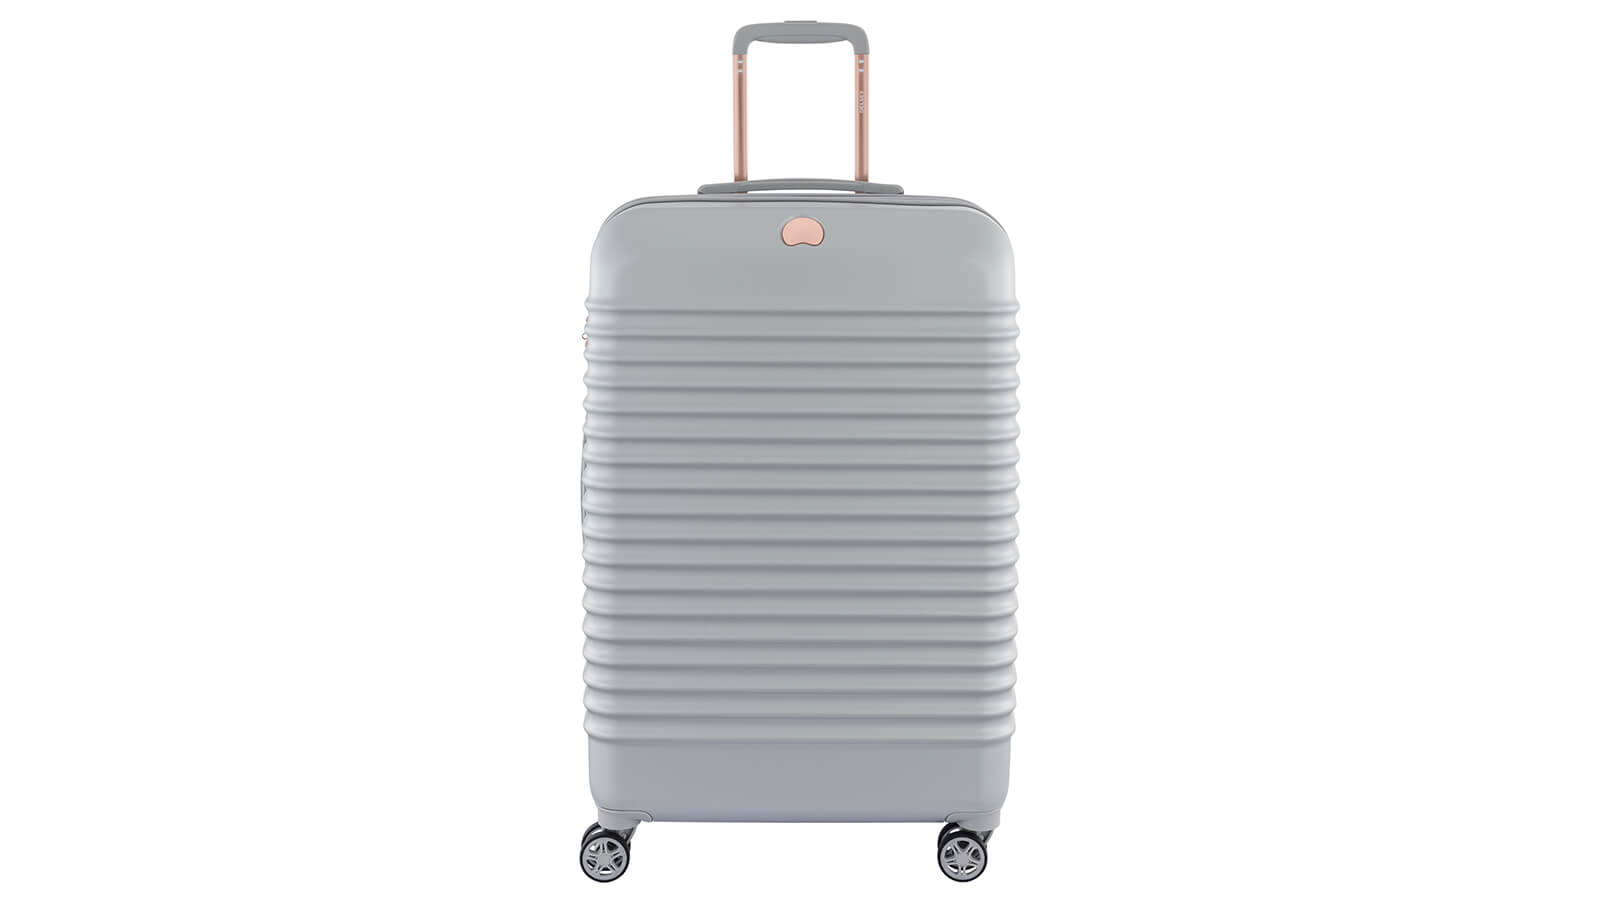 FREE Delsey Suitcase!